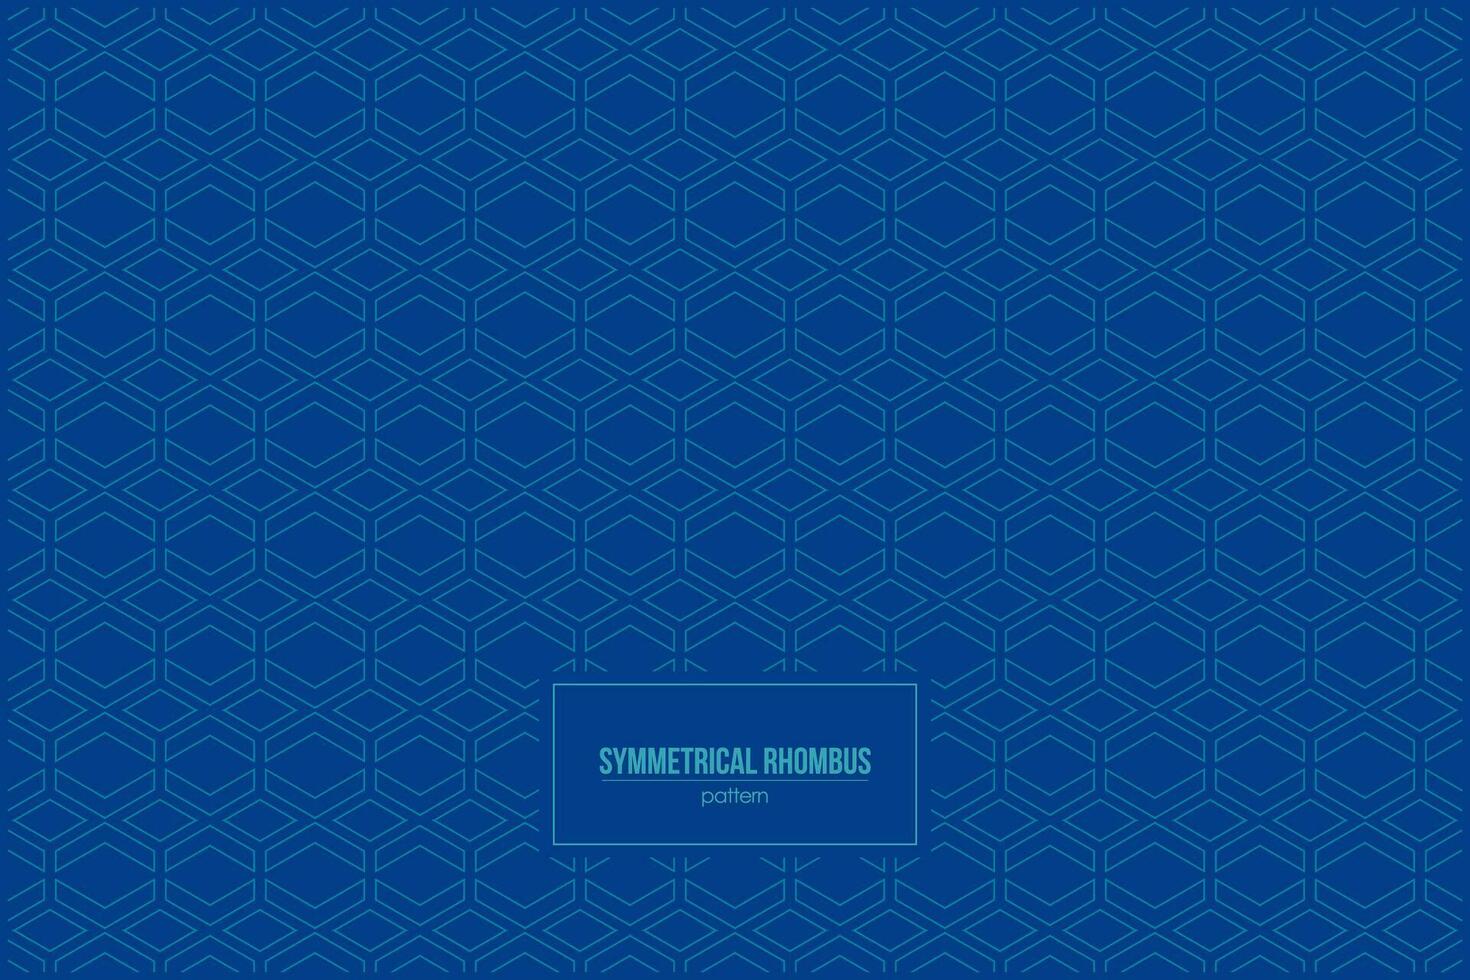 symmetrical rhombus with dark blue background with modern style vector